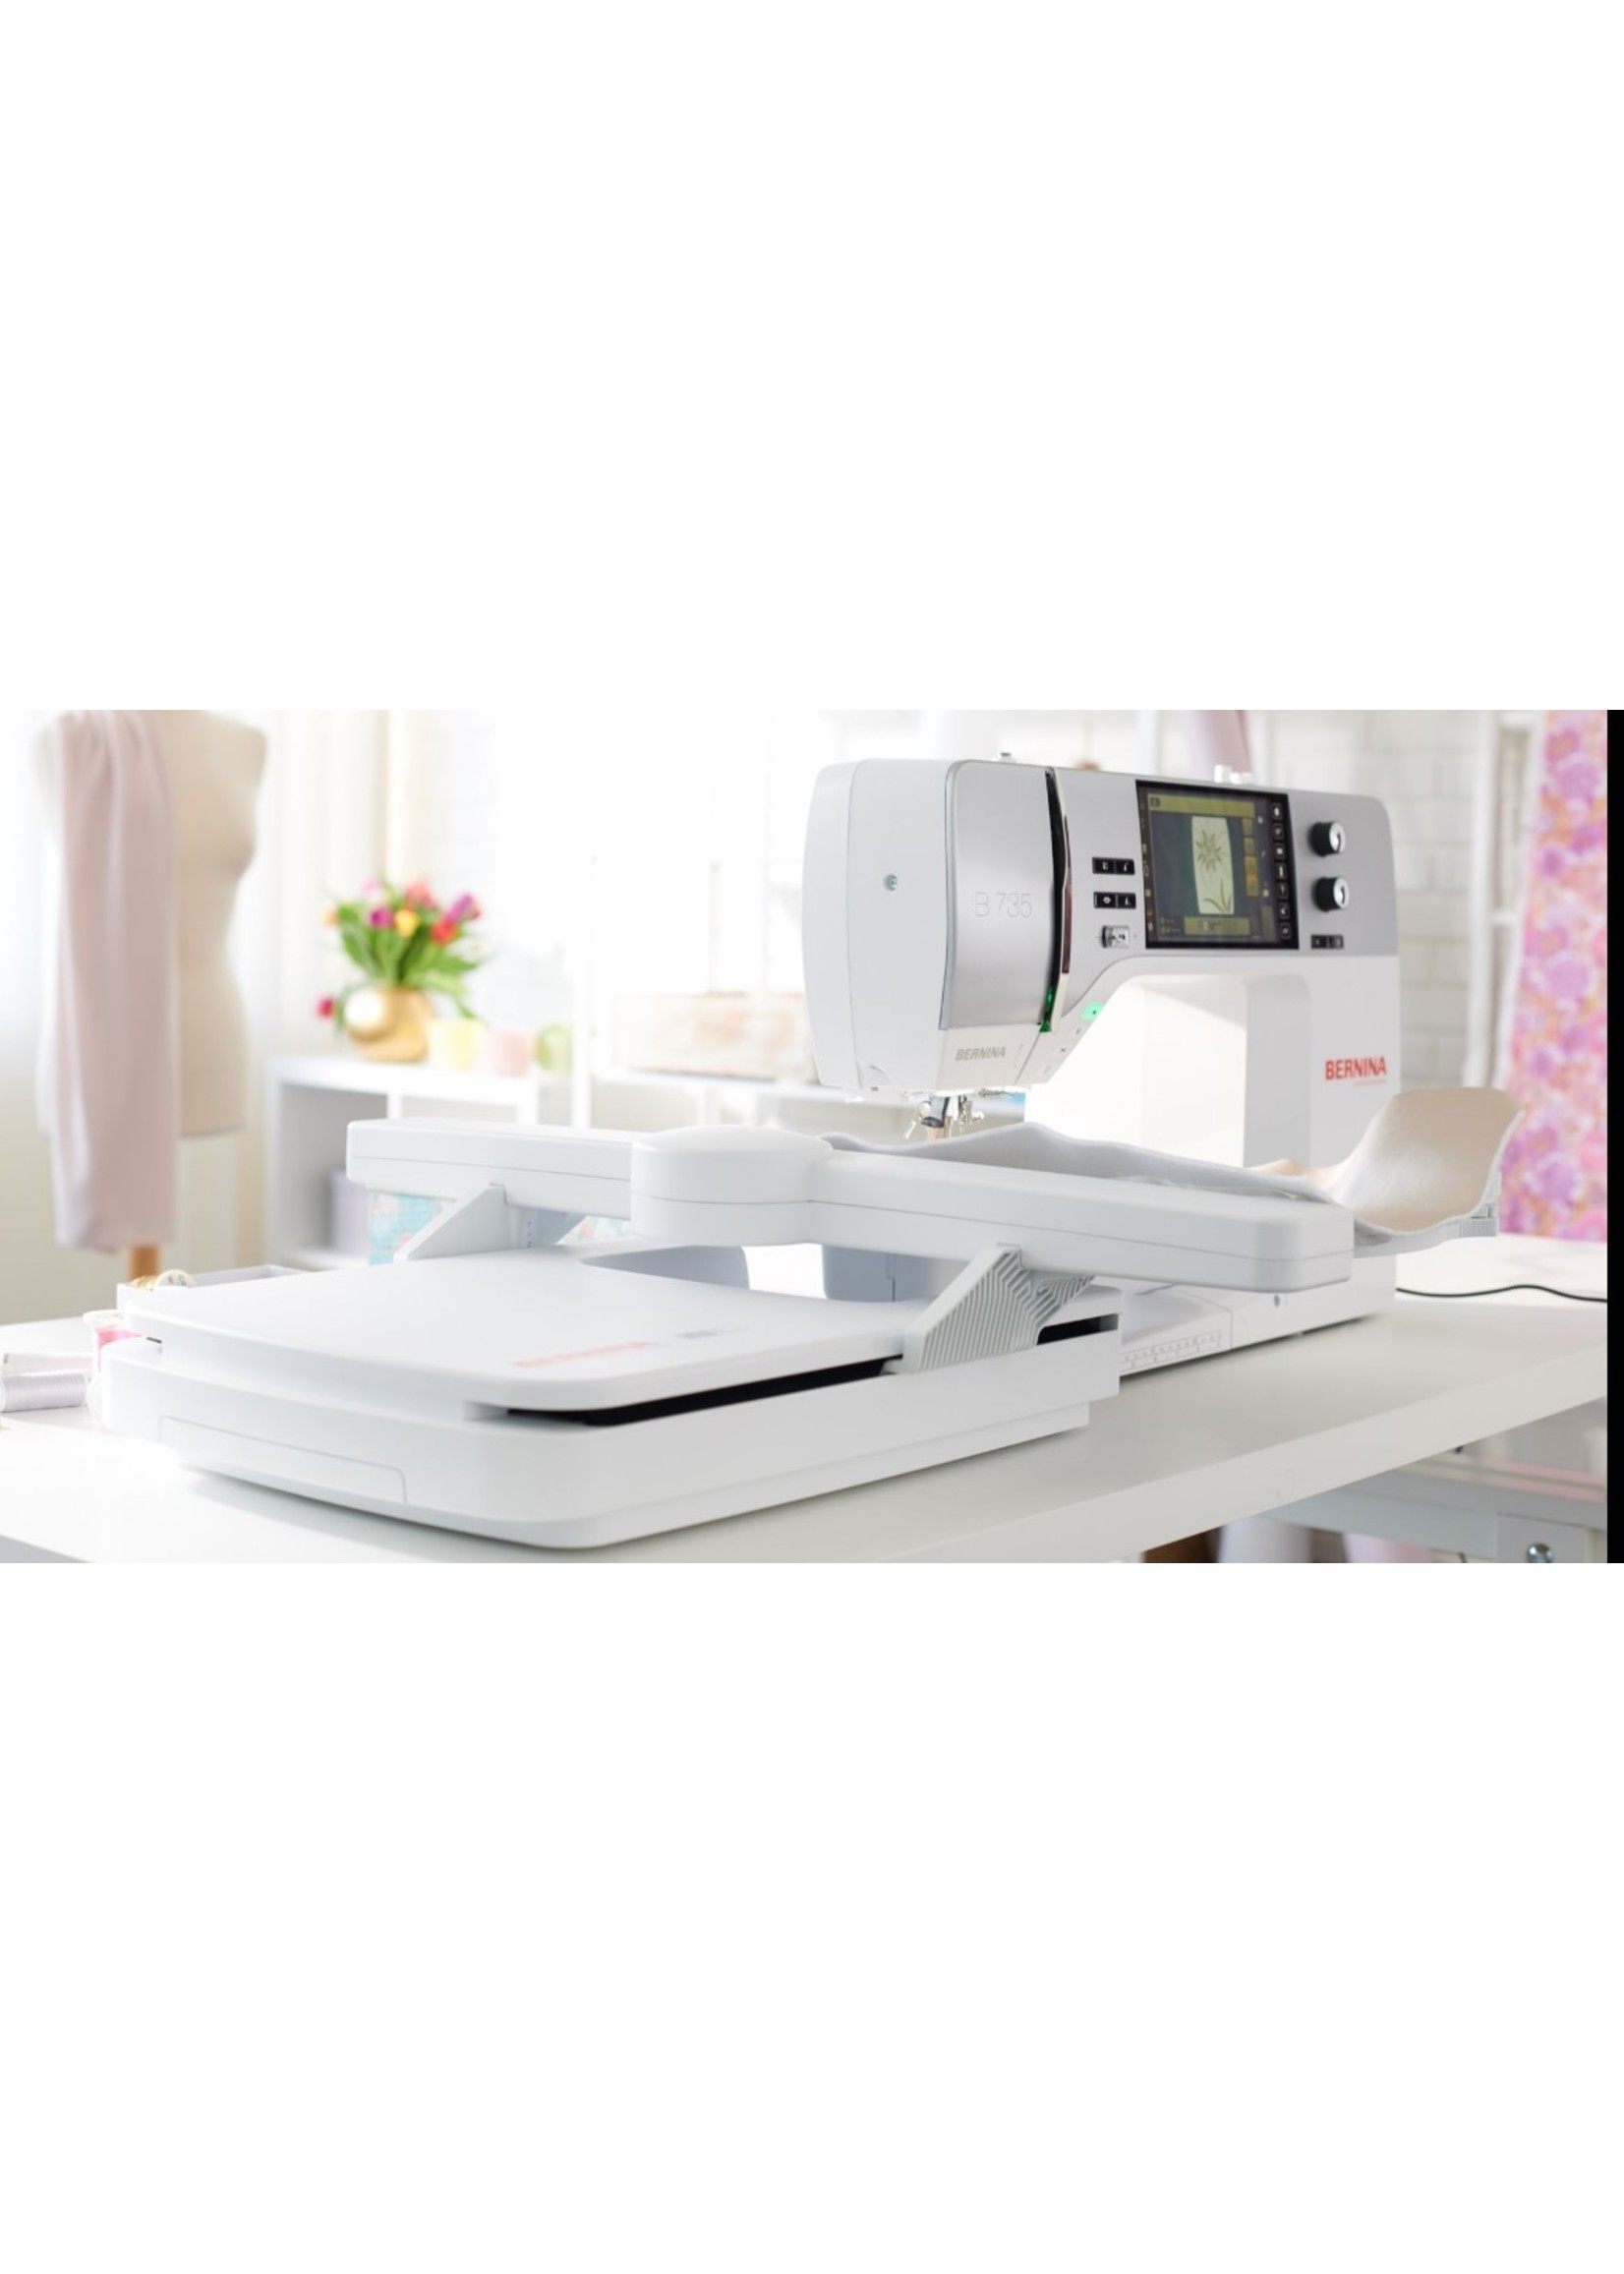 Bernina Bernina B735 E Machine & Module - AVAILABLE FOR IN-STORE PURCHASE ONLY